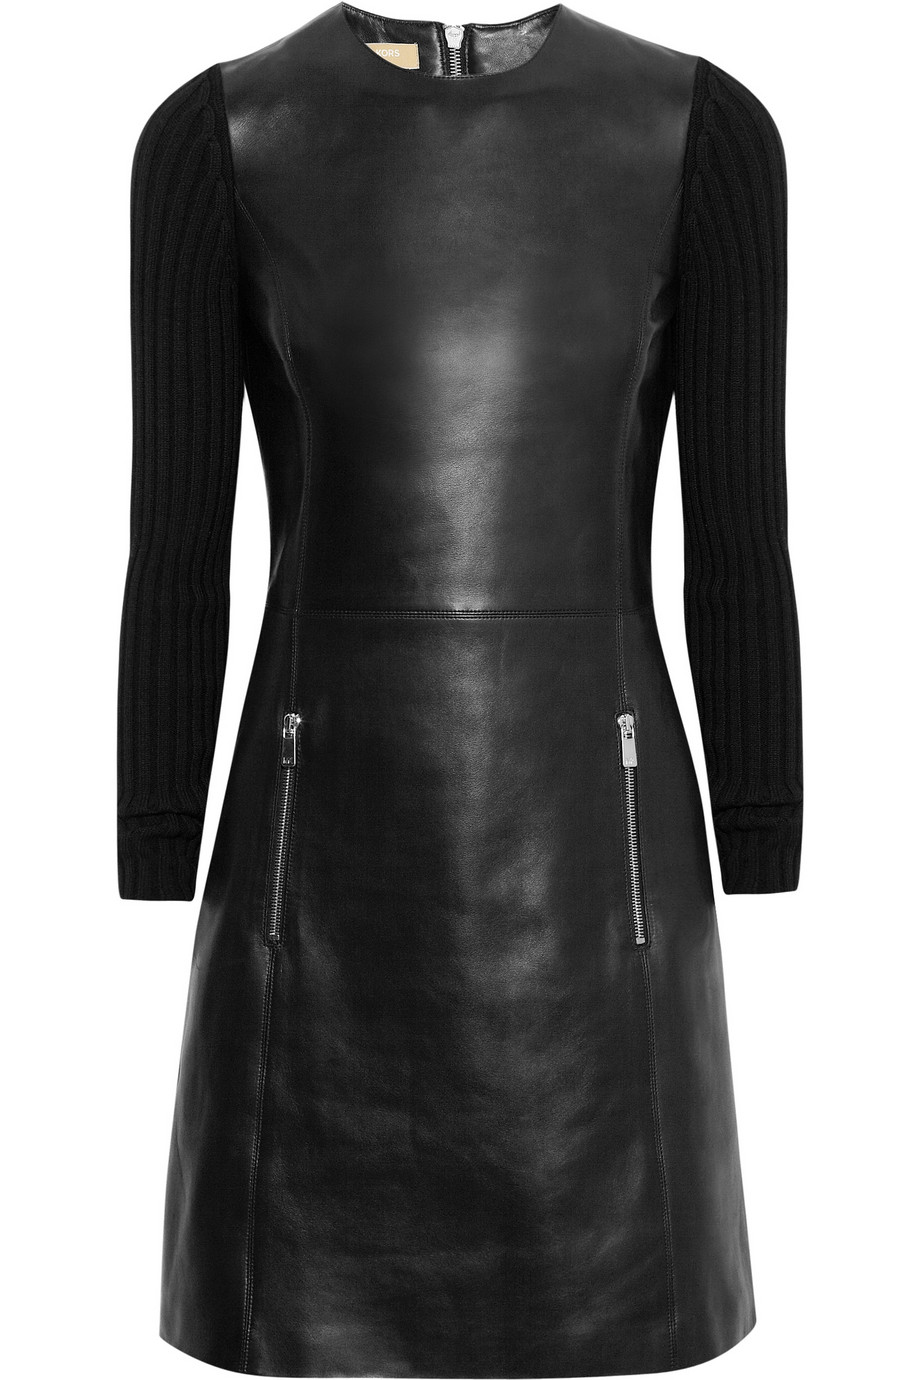 Michael kors Ribbedknit and Leather Dress in Black | Lyst